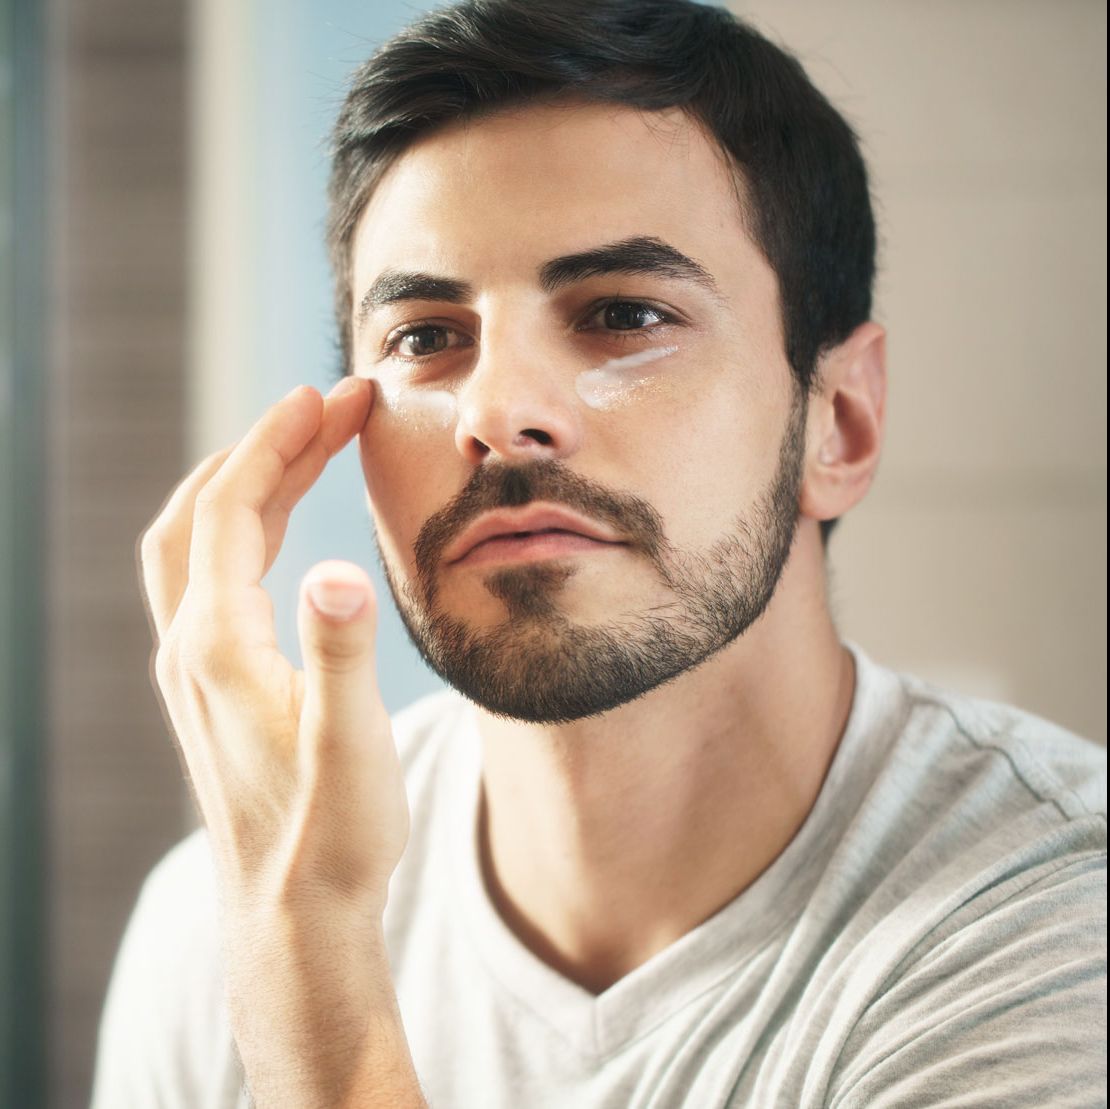 The 15 Best Eye Creams for Men, According to Your Age